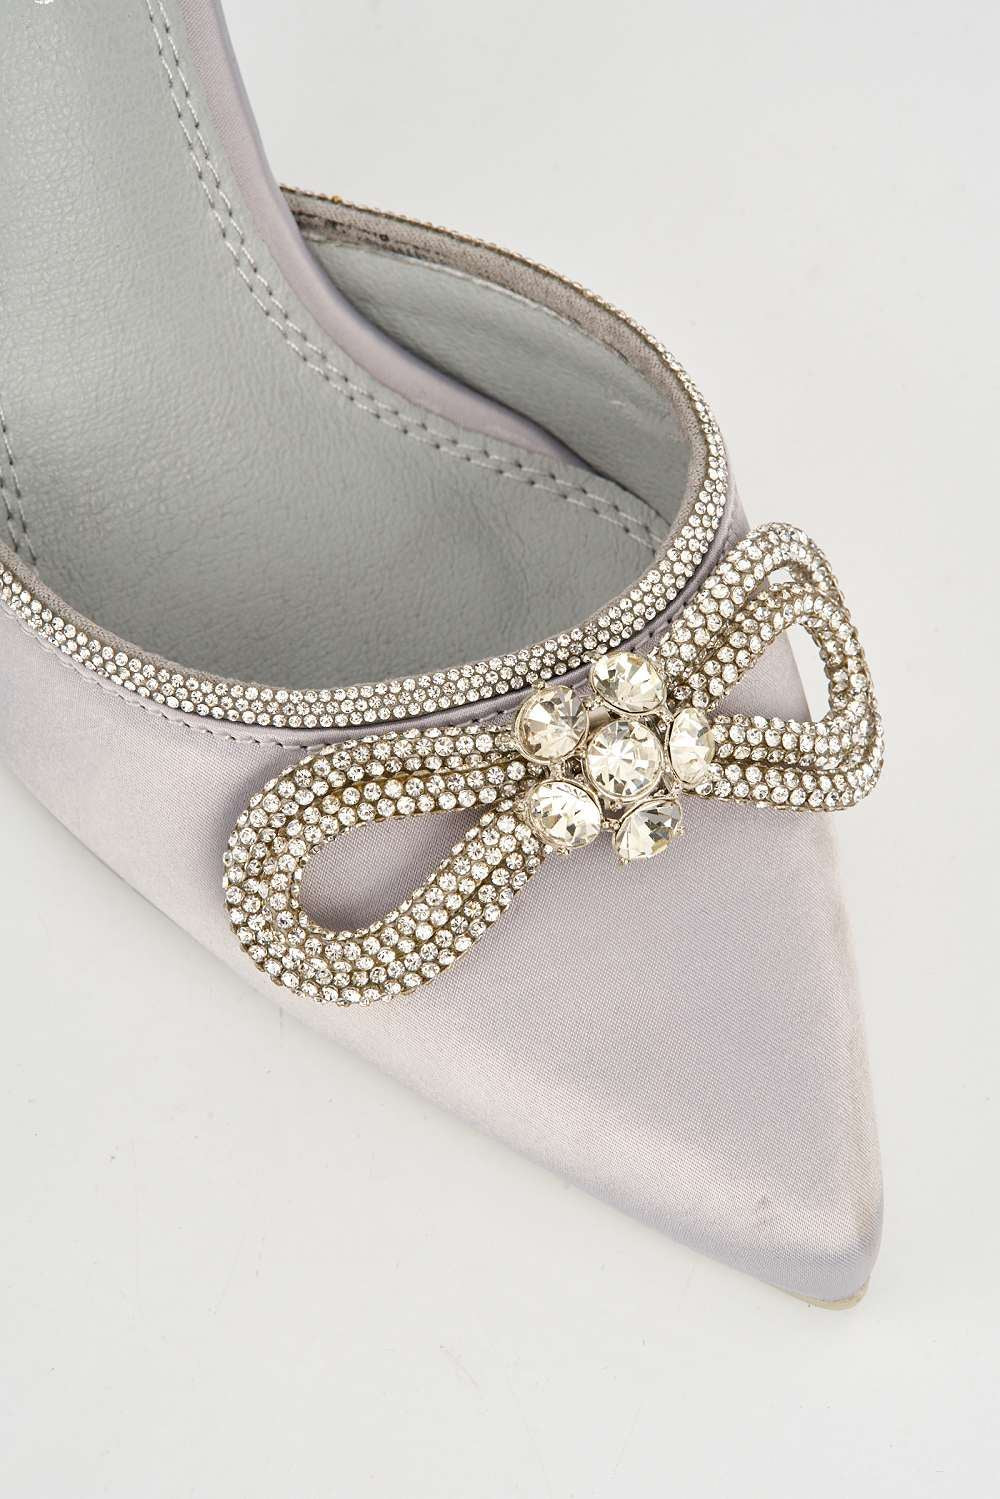 Miss Diva Natalie Pointed Toe Diamante Bow & Strap Court Shoe Heel in Silver